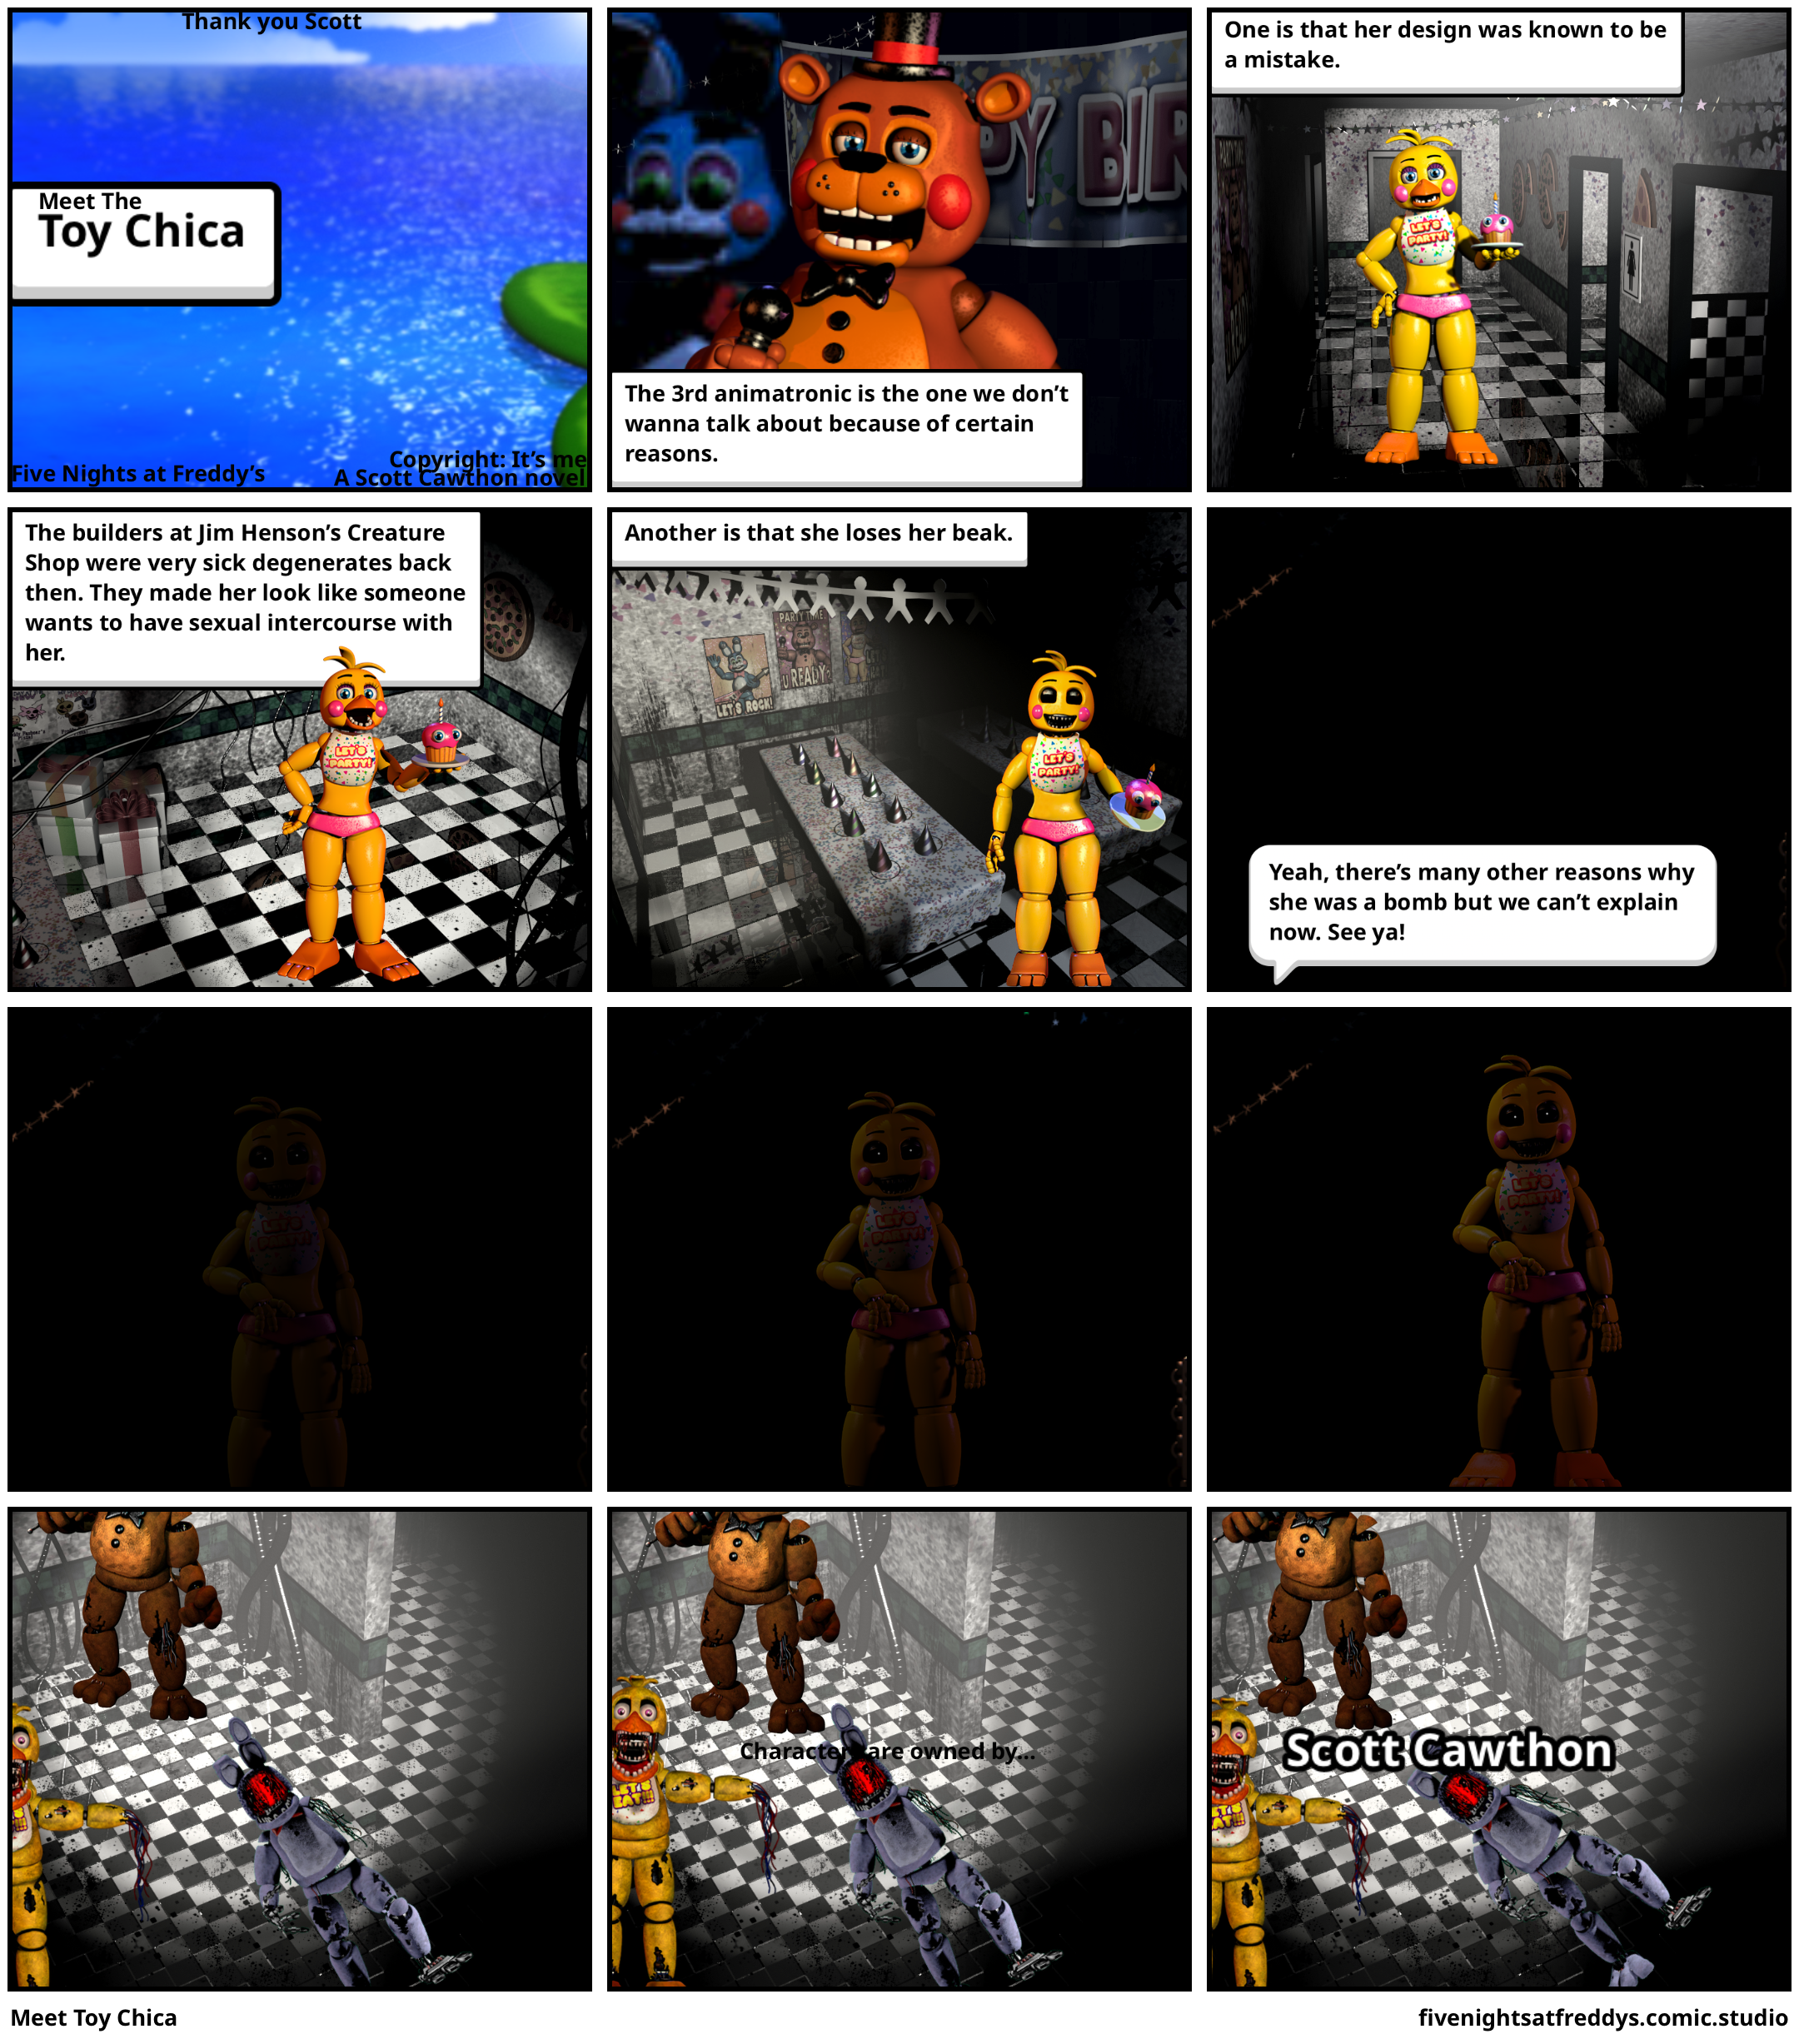 Meet Toy Chica